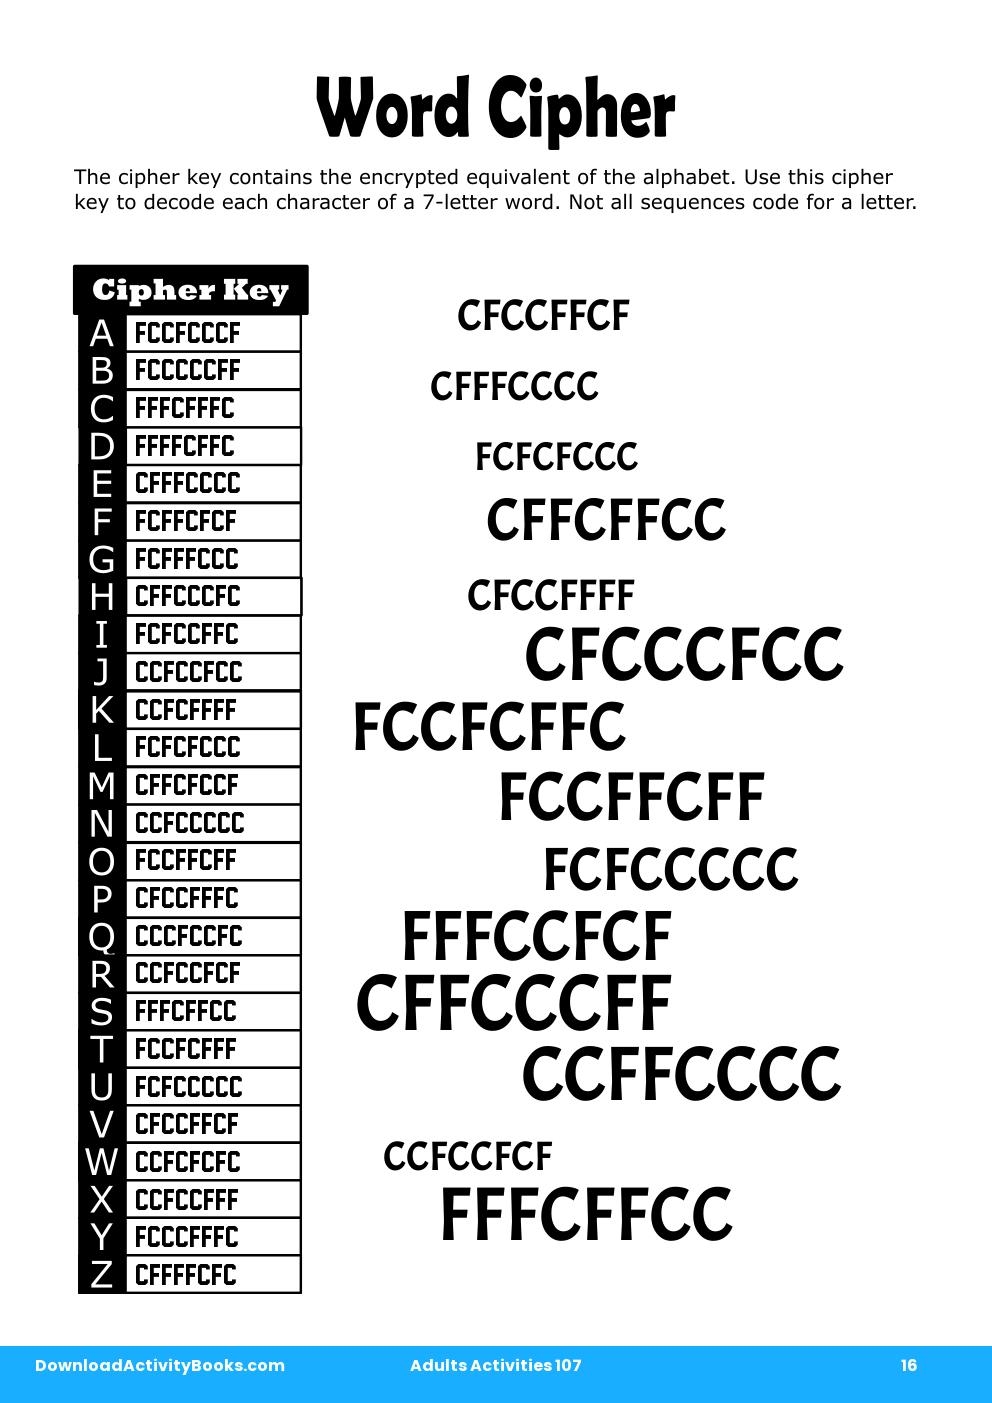 Word Cipher in Adults Activities 107